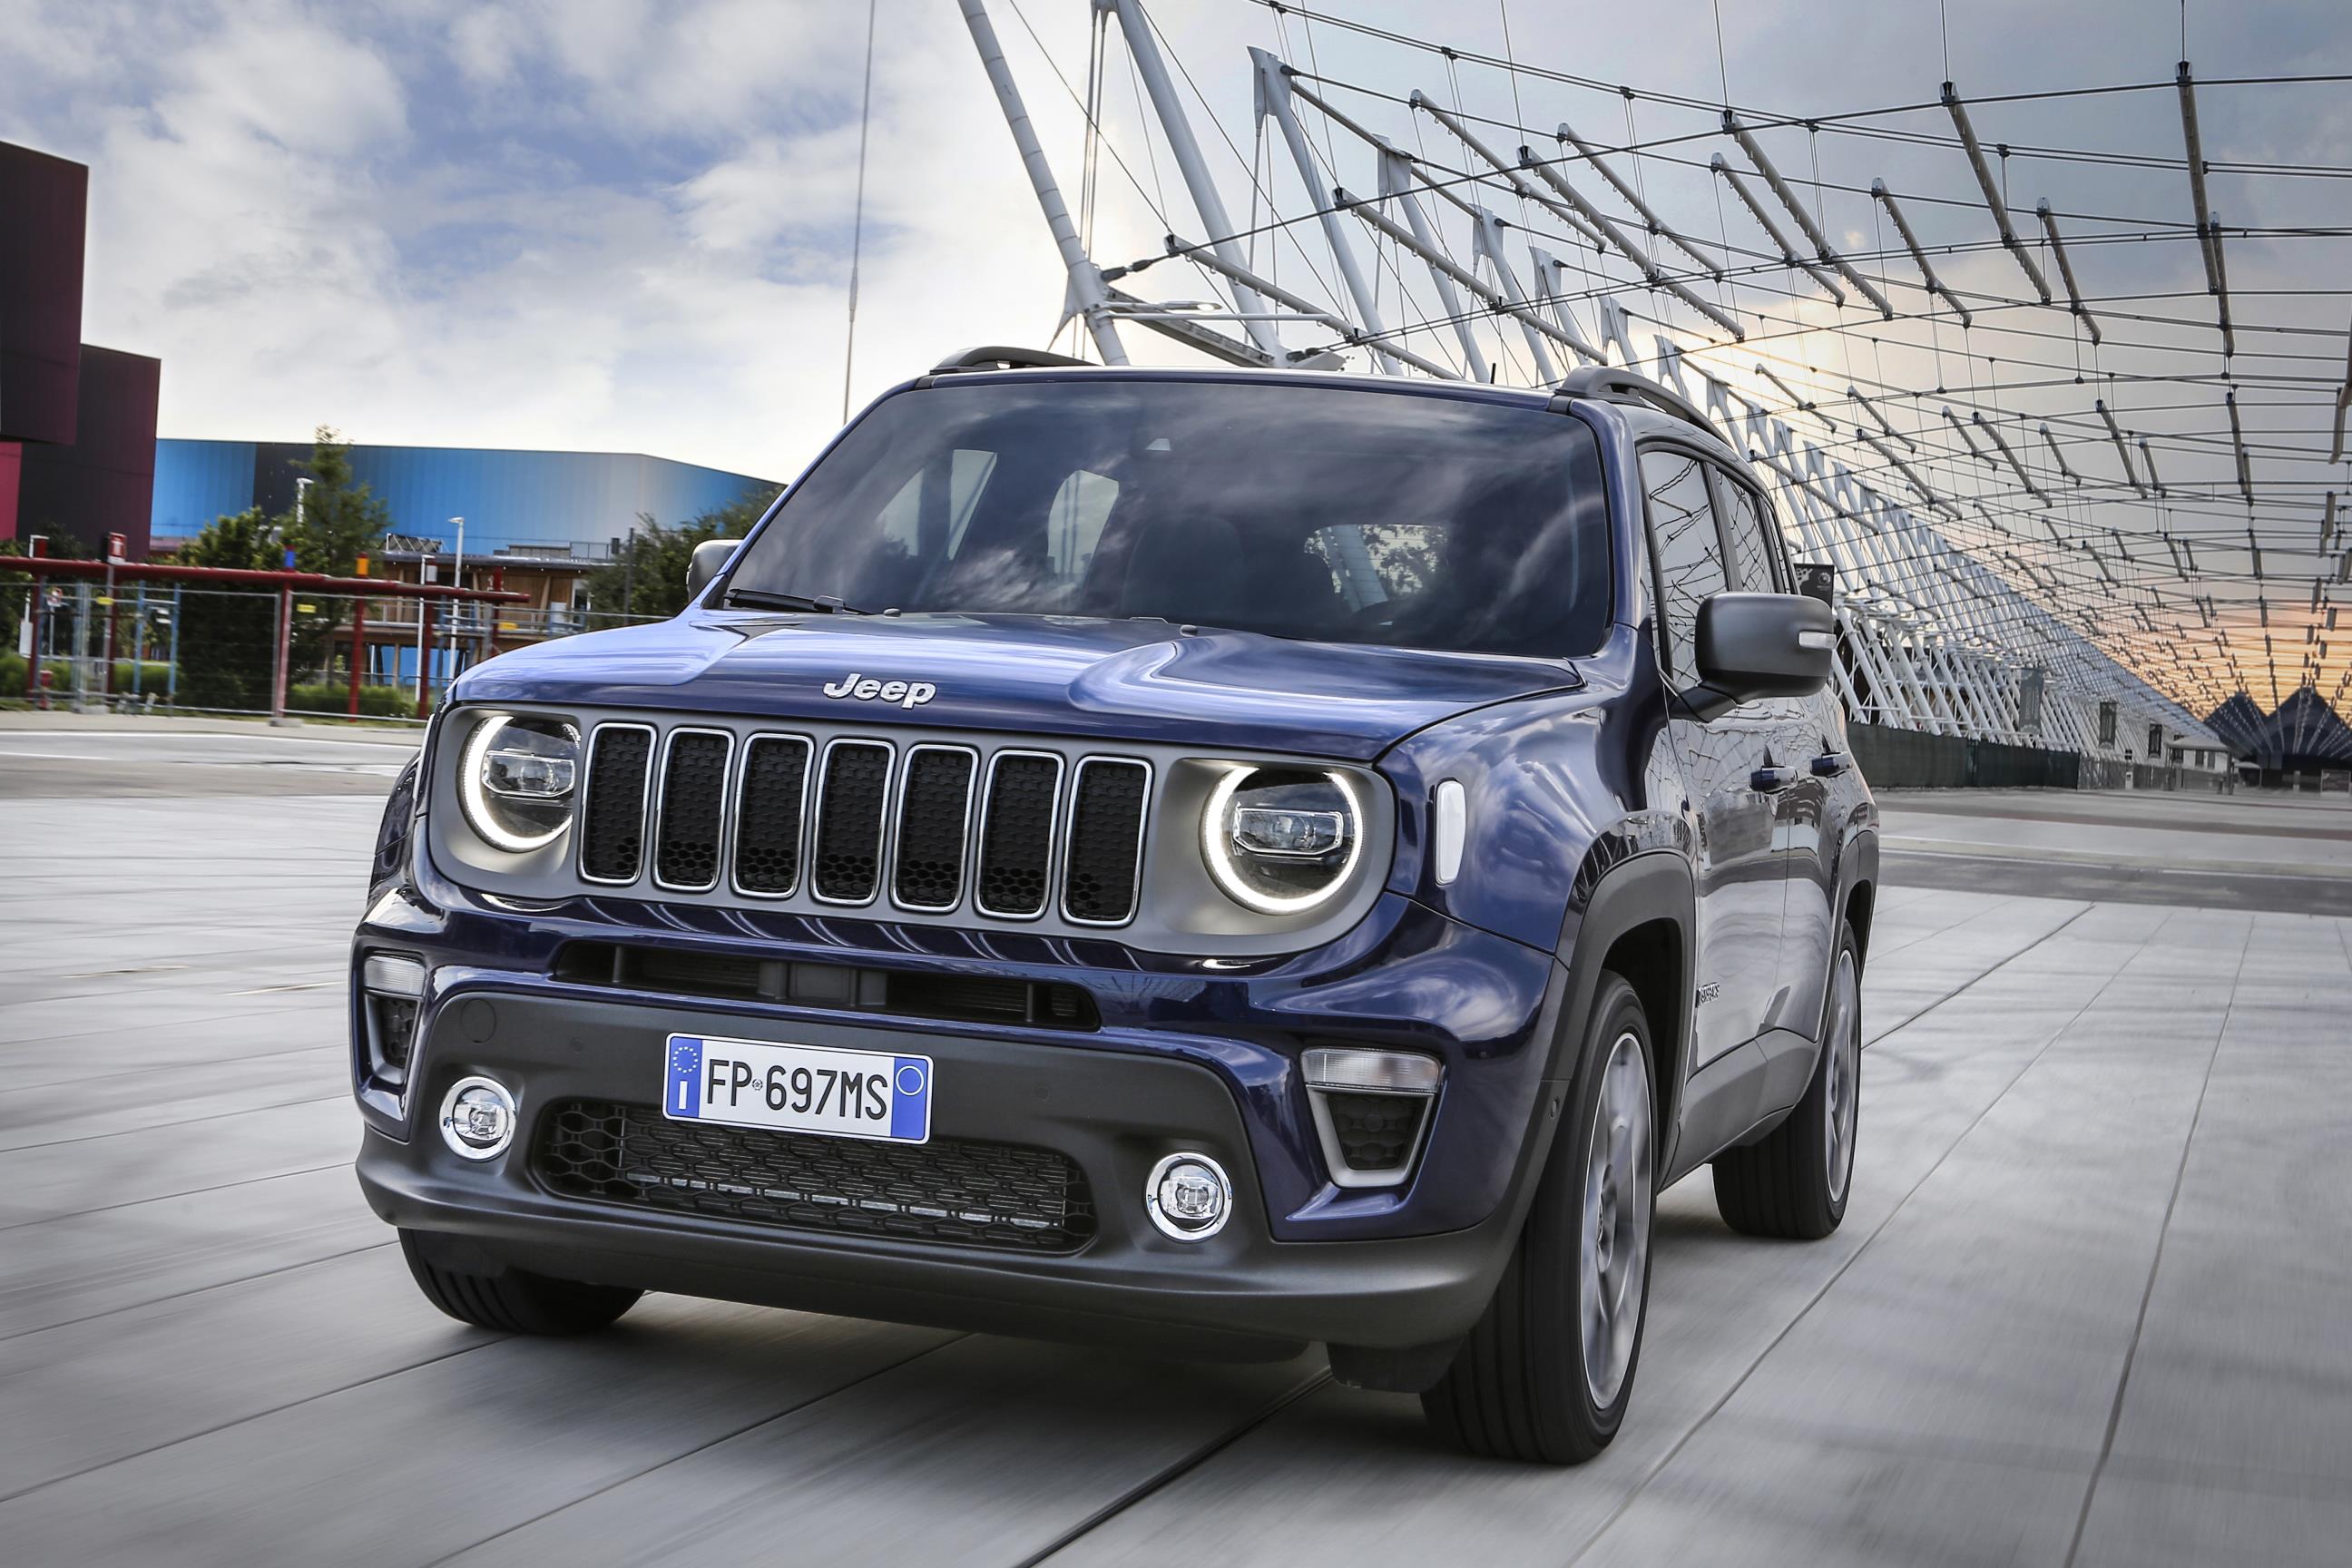 Blue Jeep Renegade parked with sculptural building behind it